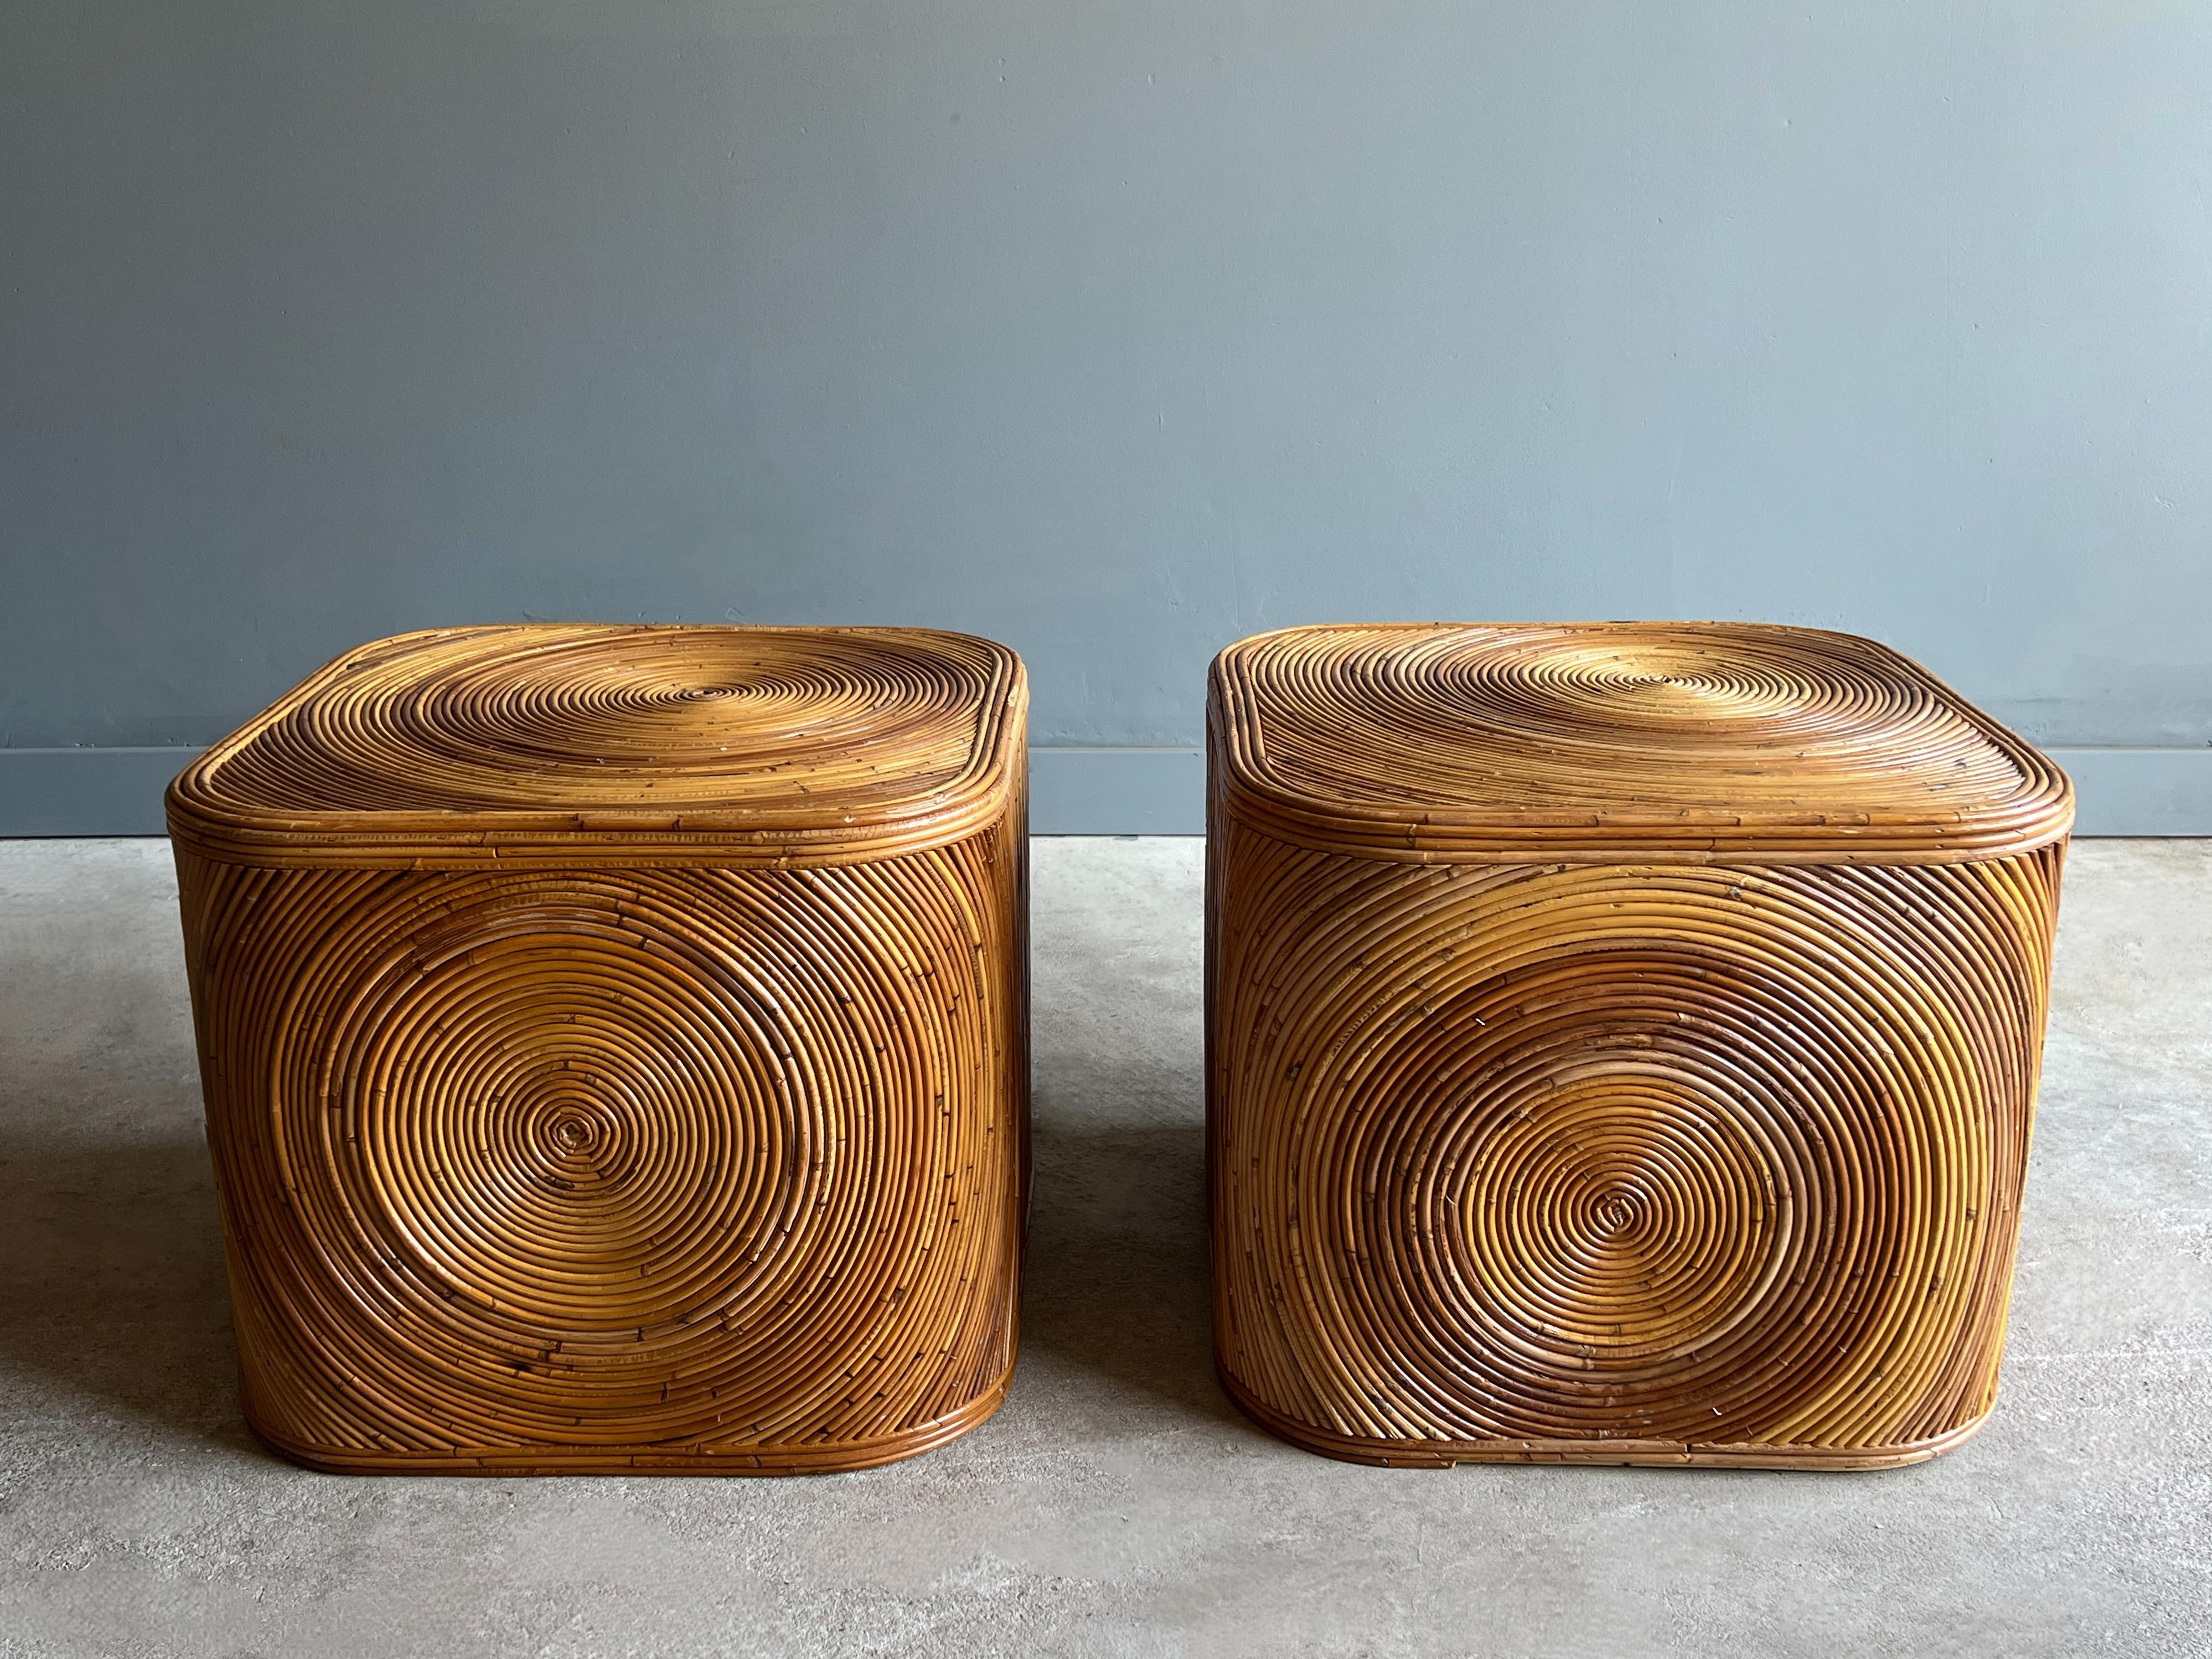 Amazing pair of vintage split reed bamboo tables. Each table features an organic spiral pattern on one side and top. They can be displayed facing any direction depending on desired pattern and movement. 

The bent split reeds vary in color and